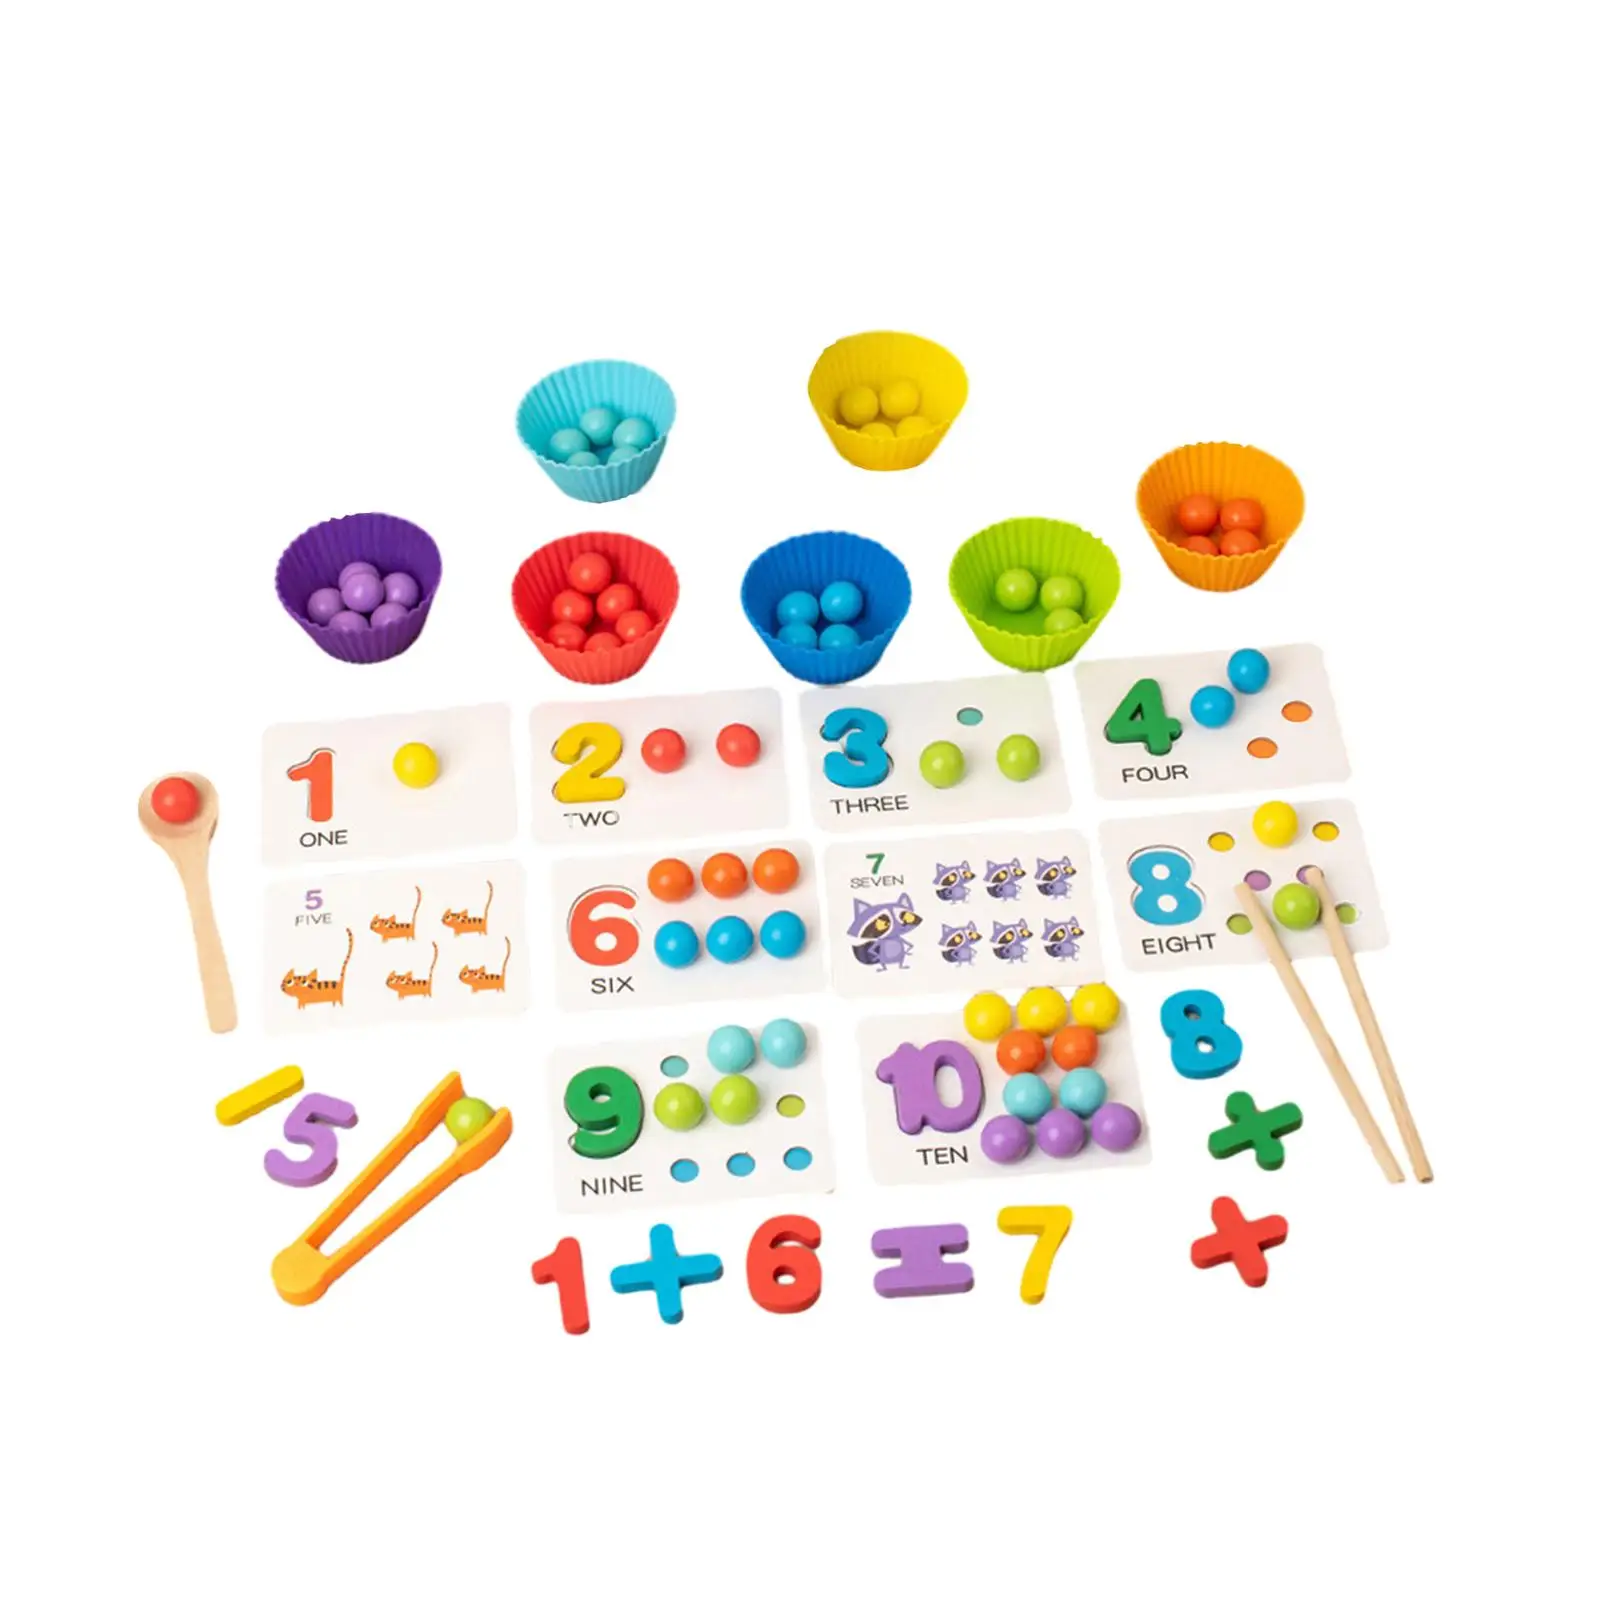 Clip Bead Game Math Manipulatives Educational Counting Matching Game for Interaction Kindergarten Primary Activity Coordination